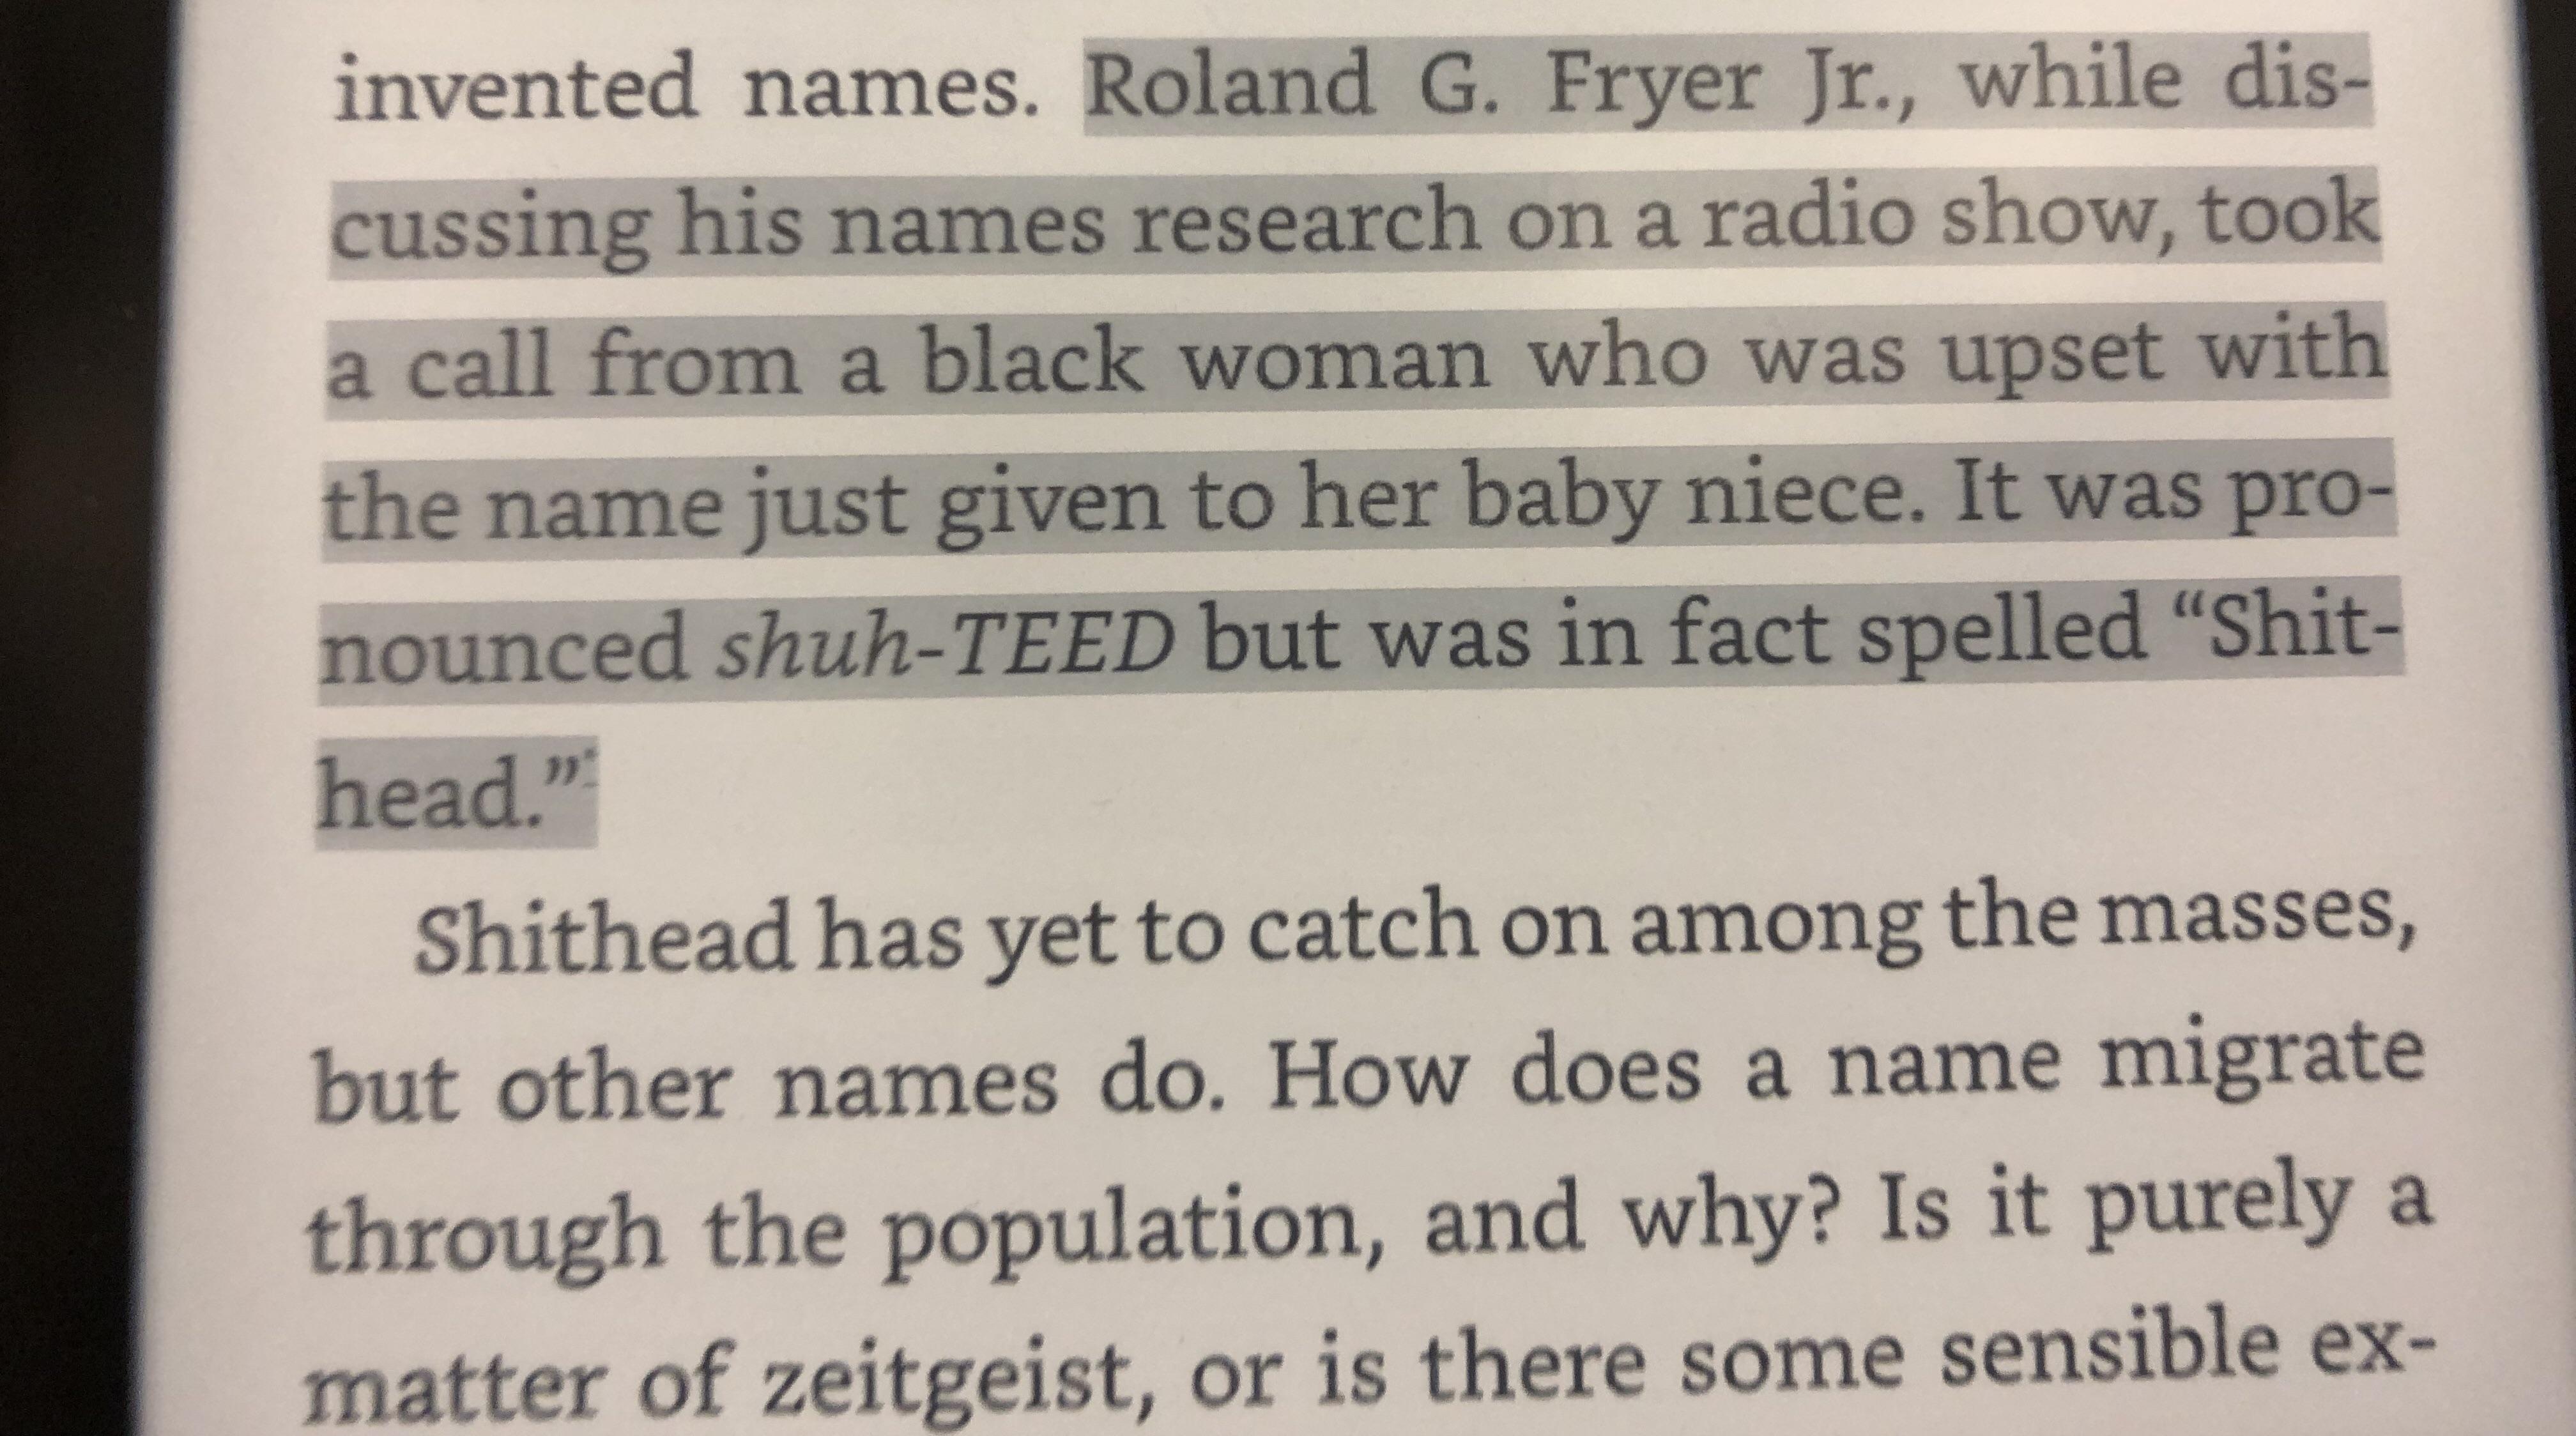 new century schoolbook - invented names. Roland G. Fryer Jr., while dis cussing his names research on a radio show, took a call from a black woman who was upset with the name just given to her baby niece. It was pro nounced shuhTeed but was in fact spelle